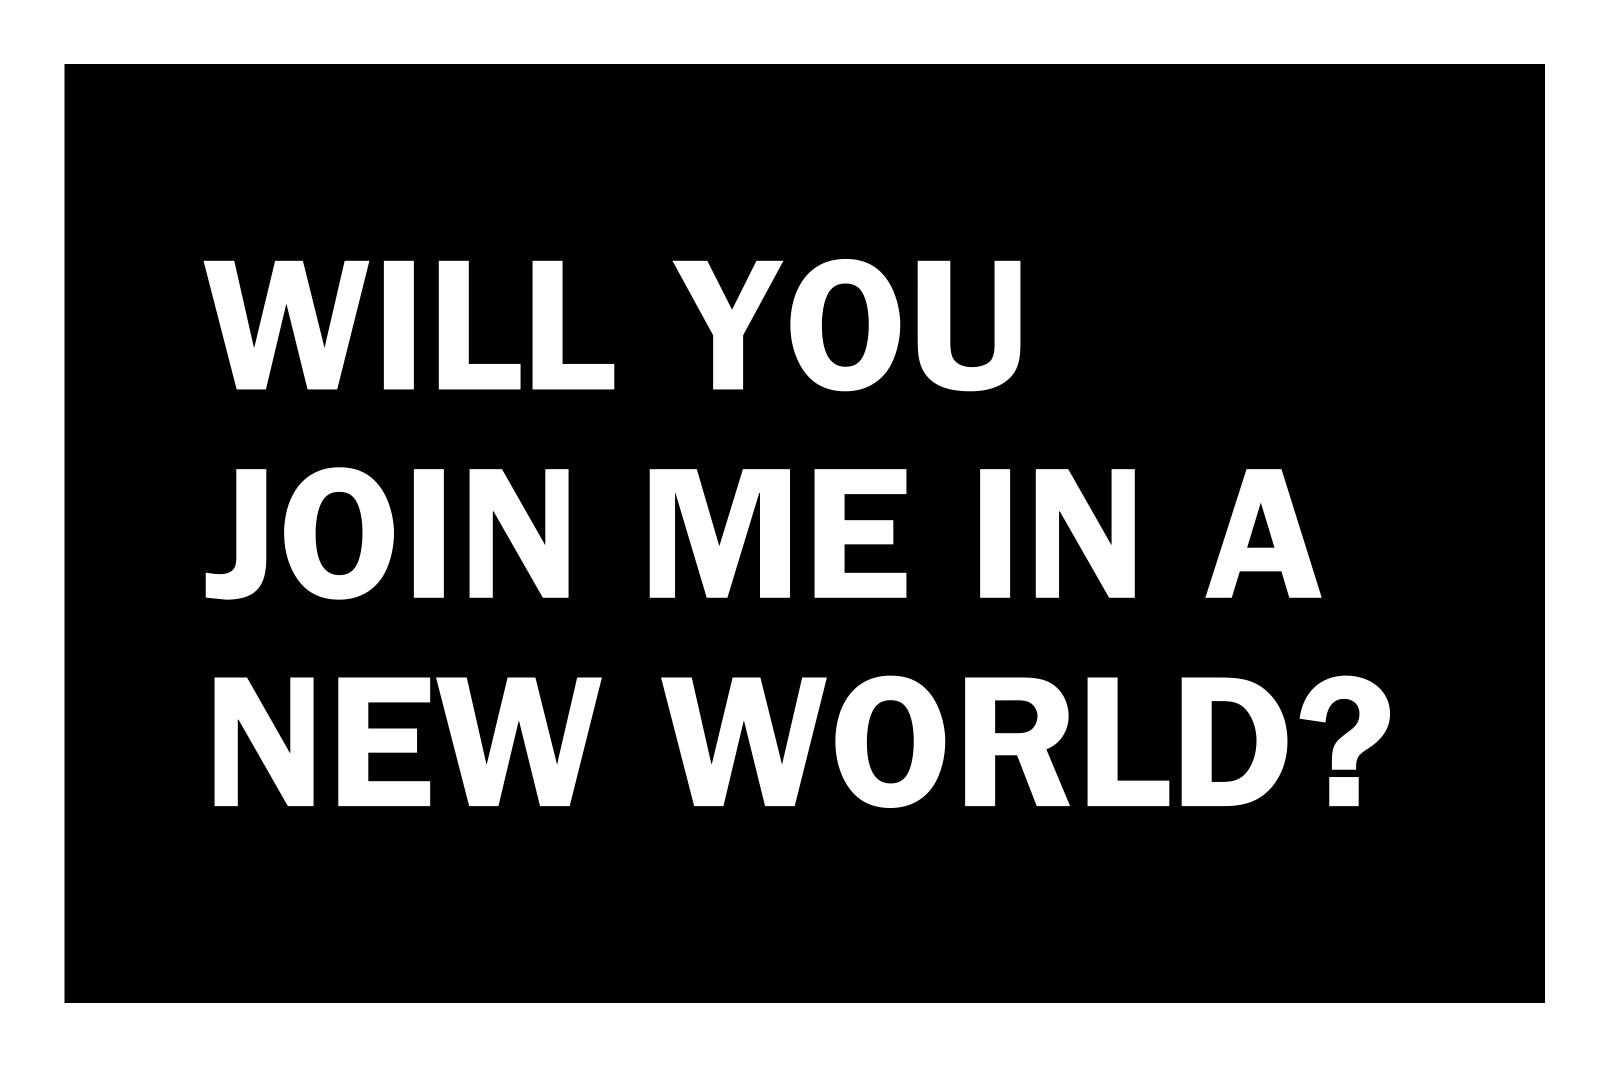 The words "WILL YOU JOIN ME IN A NEW WORLD?" appear in thick white san-serif letters on a black background, with a white border around the image.